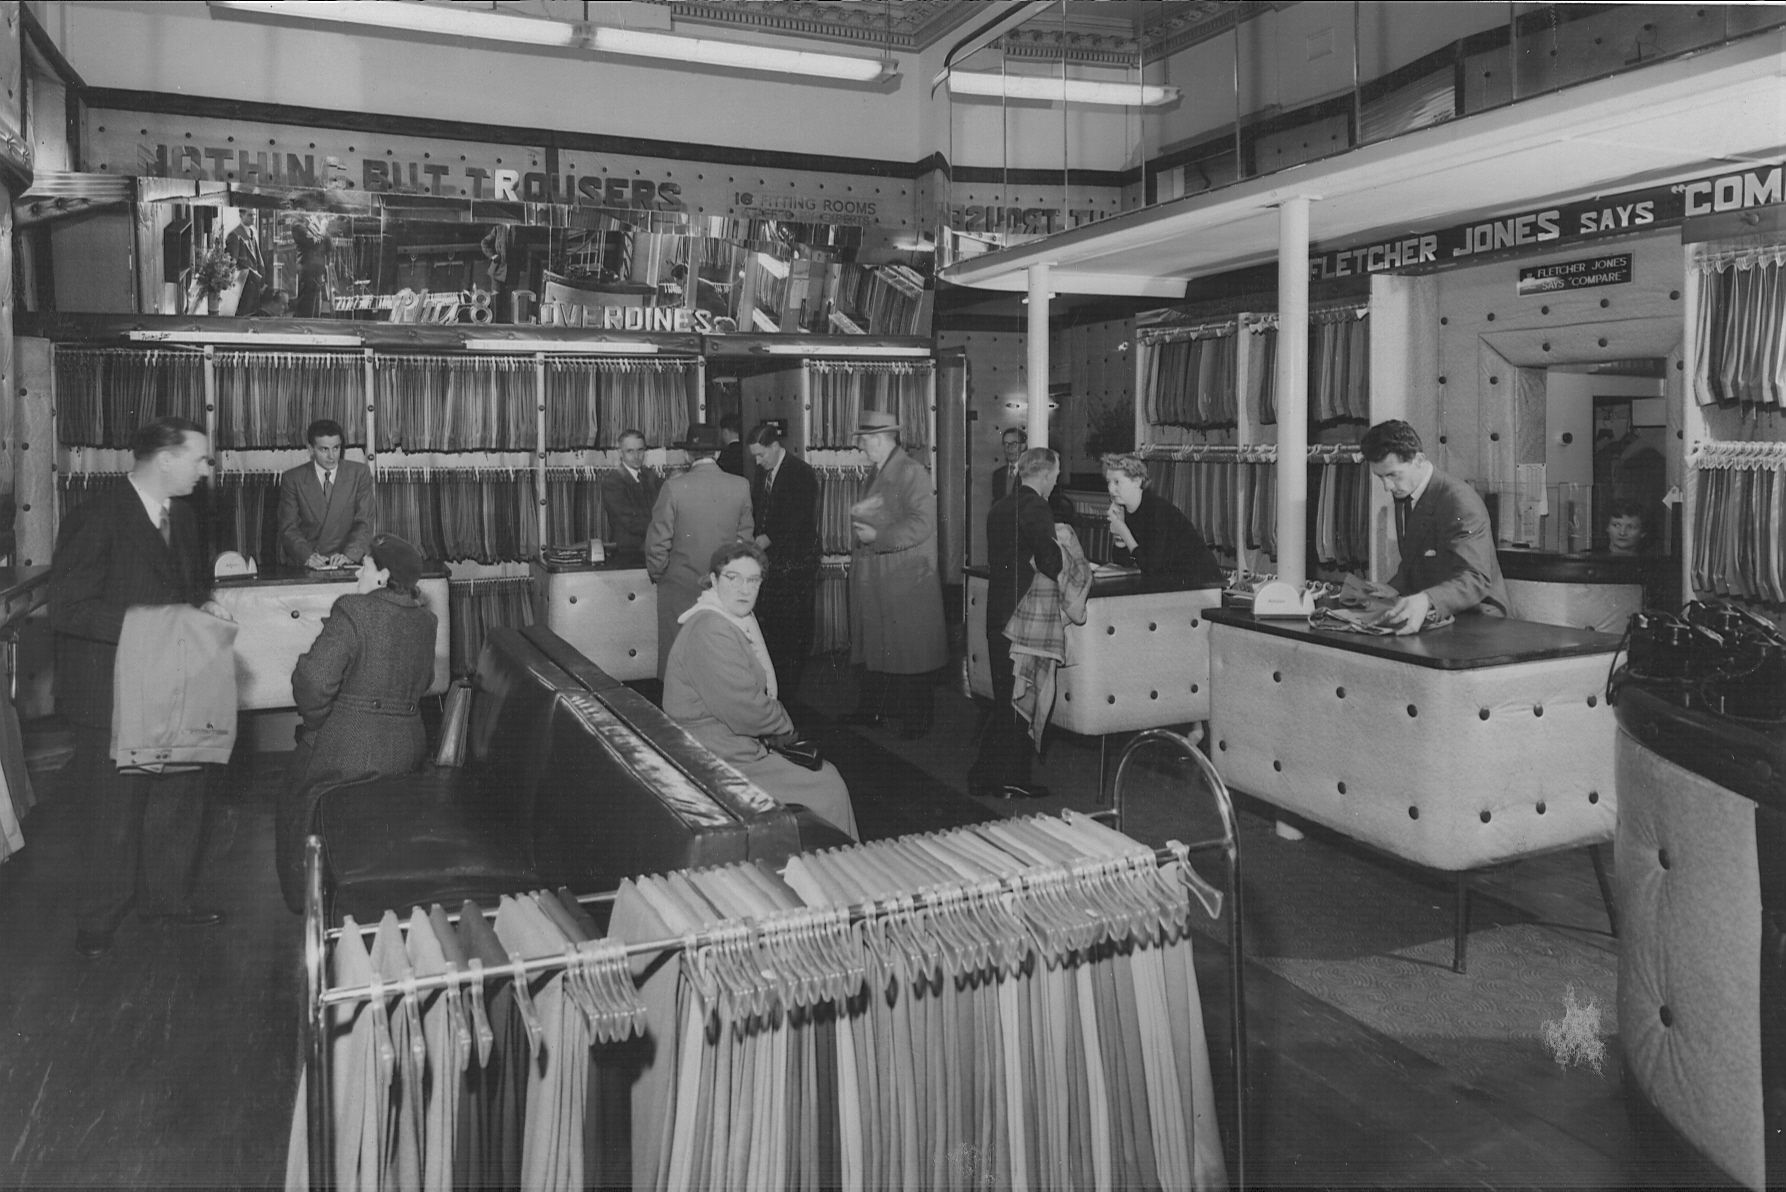 Inside the Collins St store. Photo: Jones Family Collection.